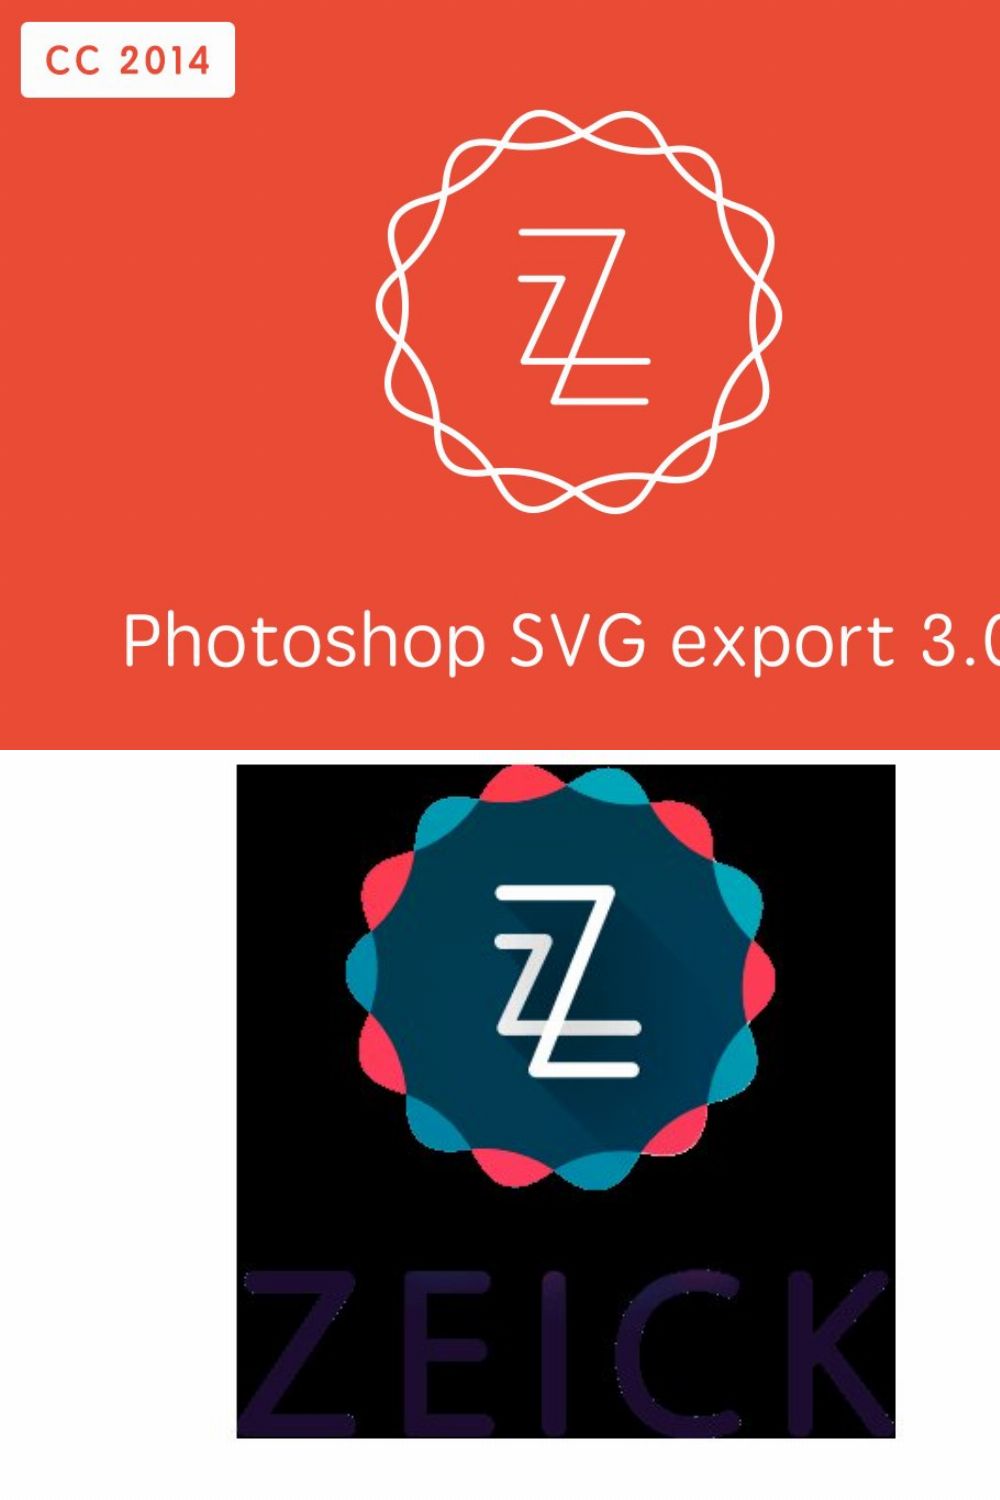 Zeick - Photoshop SVG export 5% OFF pinterest preview image.